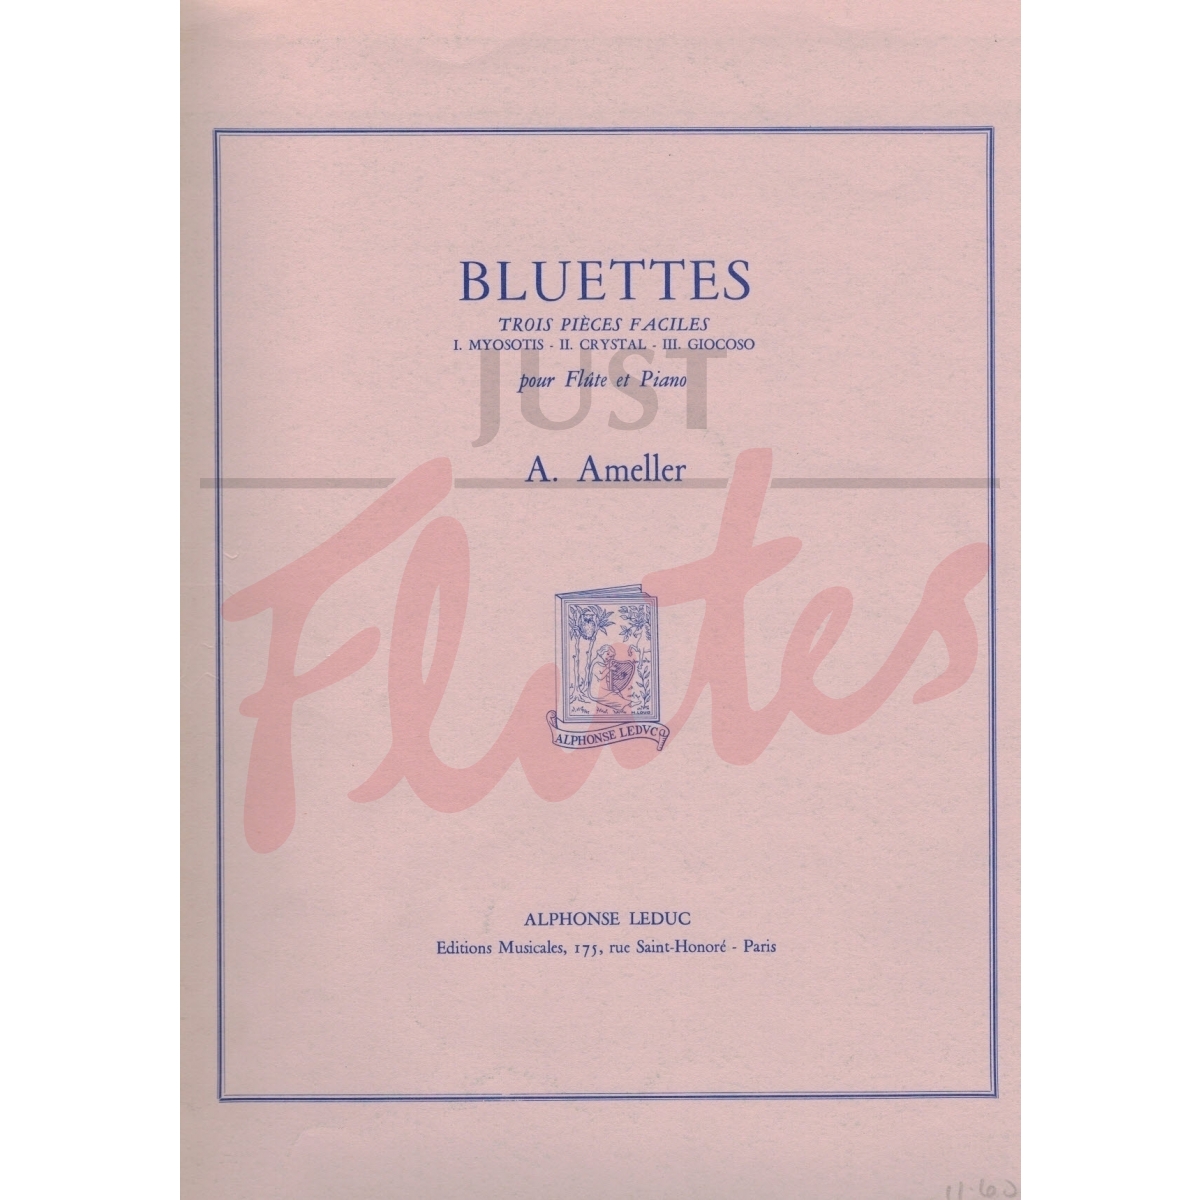 Bluettes for Flute and Piano